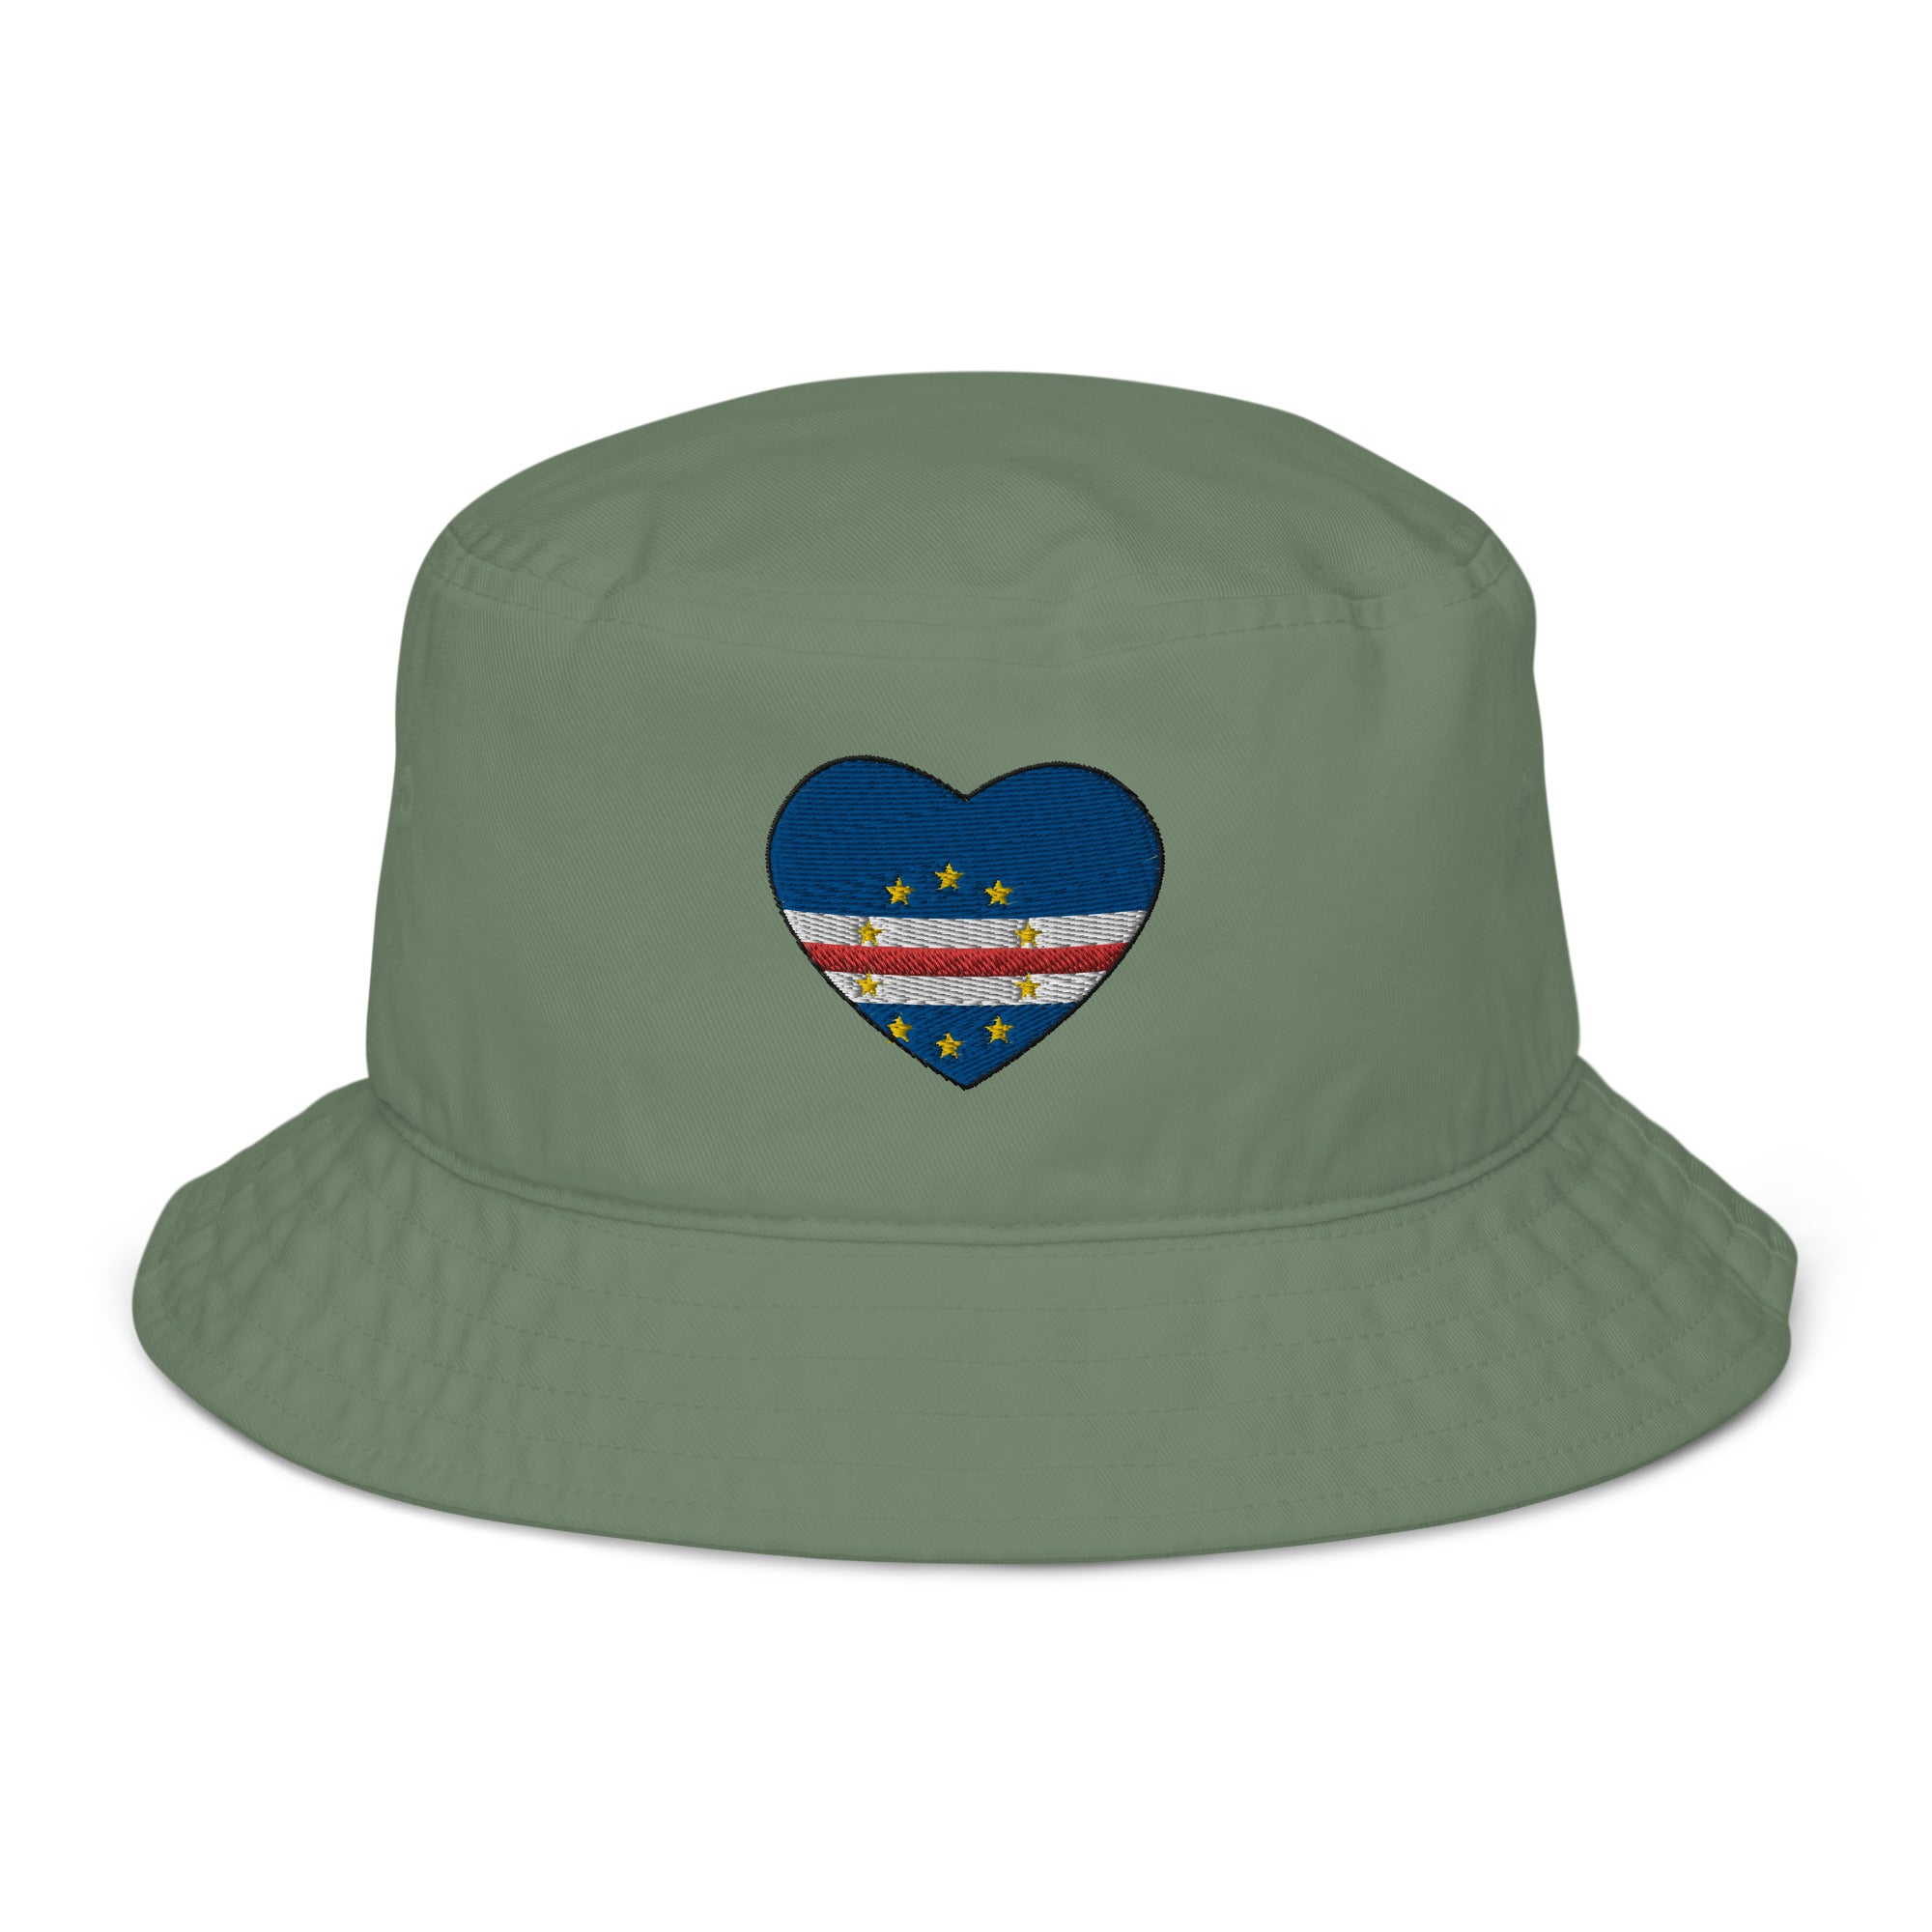 Organic bucket hat, Customized Hat, Freedom Hat, Embroidered Hat, Cape Verde, Flag